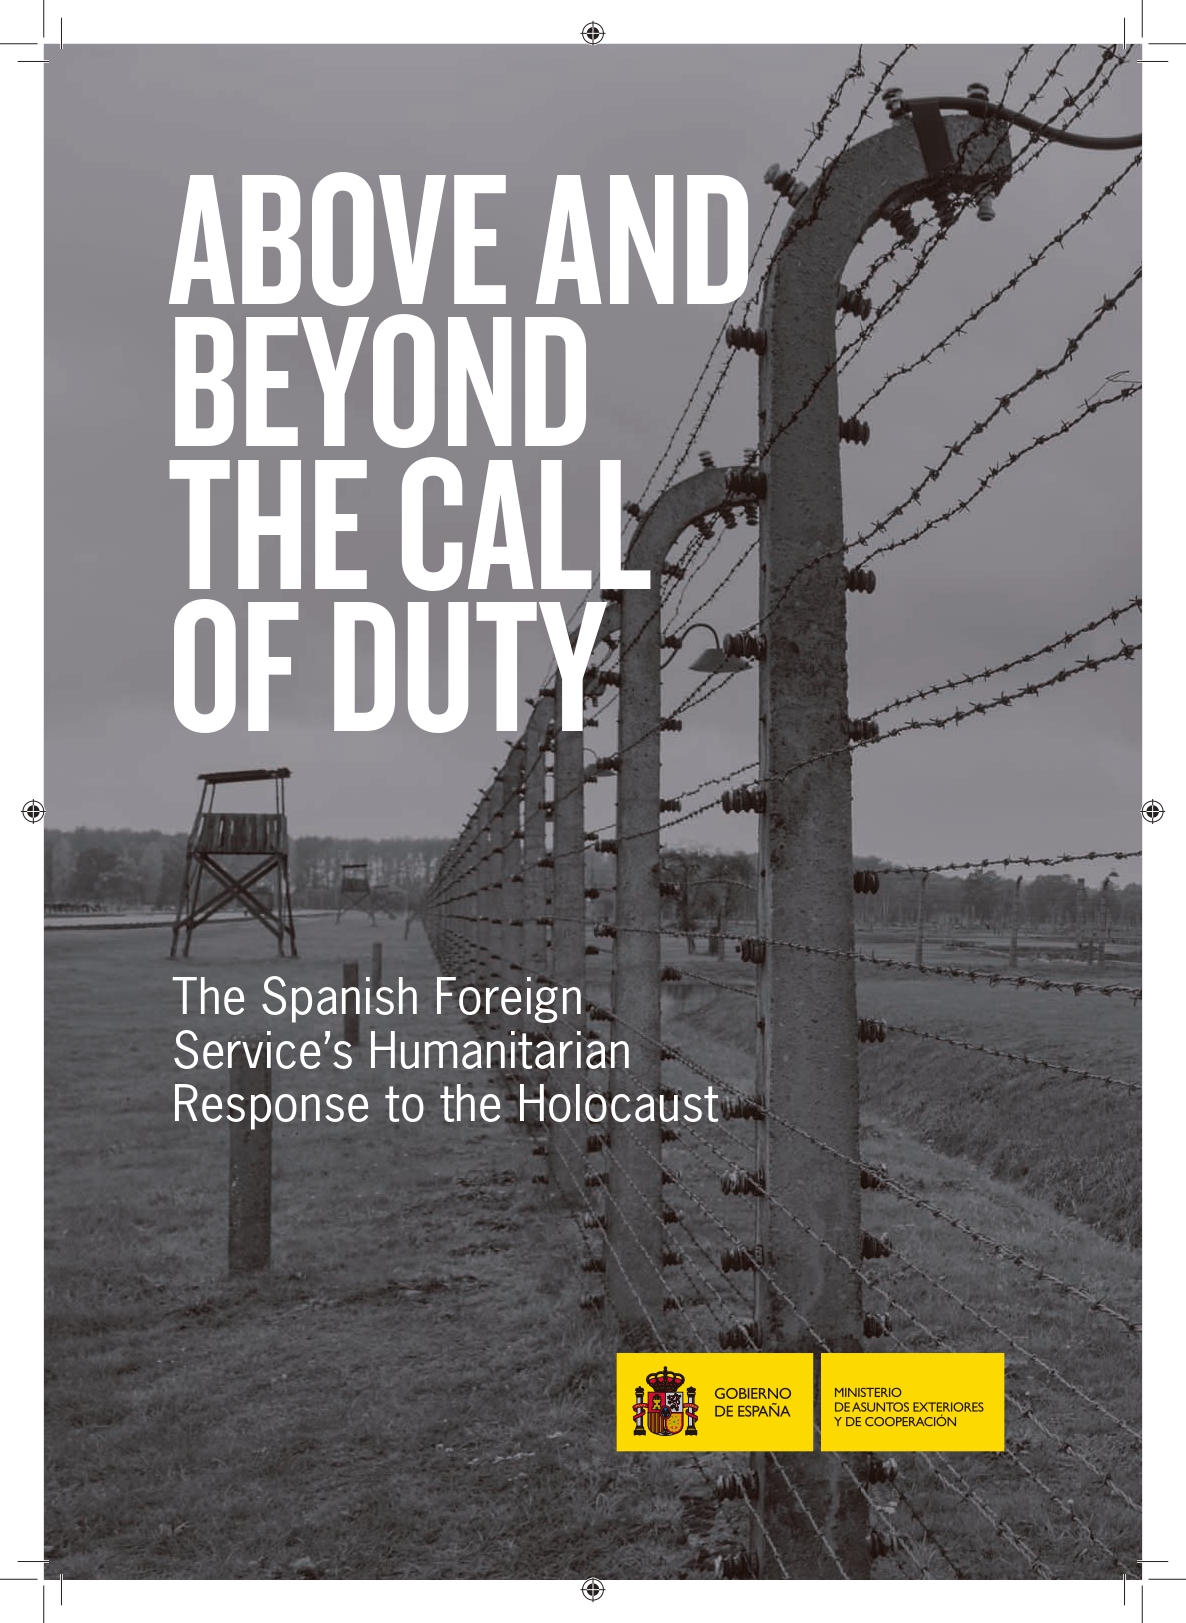 Above and beyond the call of duty: the Spanish Foreign Service’s humanitarian response to the Holocaust